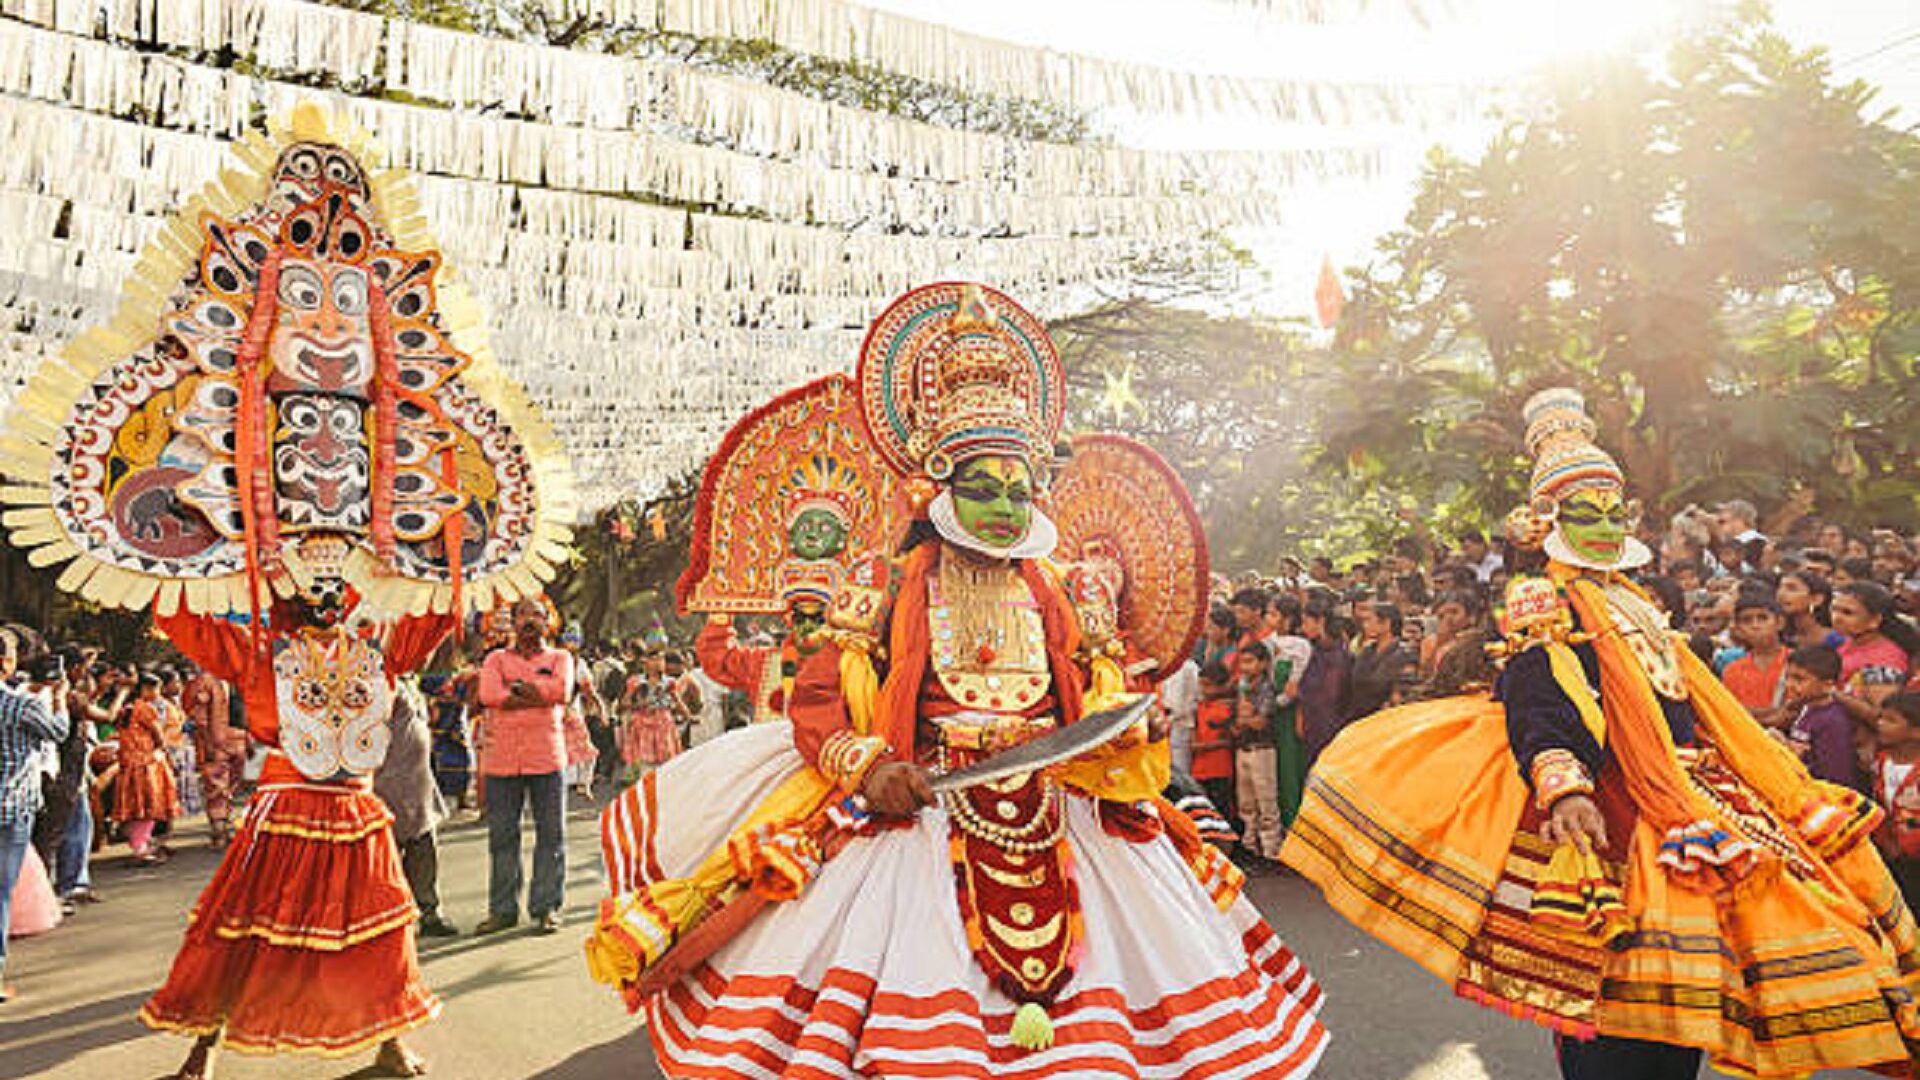 Kochi, India - January 1, 2016:  Traditional Kathakali dance on New Year carnival in Fort Kochi (Cochin), Kerala, India. Kochi, formerly known as Cochin, is a city and port in the Indian state of Kerala. One of the famous events here is Cochin New Year Carnival, since 1984 at Fort Kochi. It is celebrated at Fort Kochi every year during the last ten days of December. There are massive procession of caparisoned elephants, games and partying.